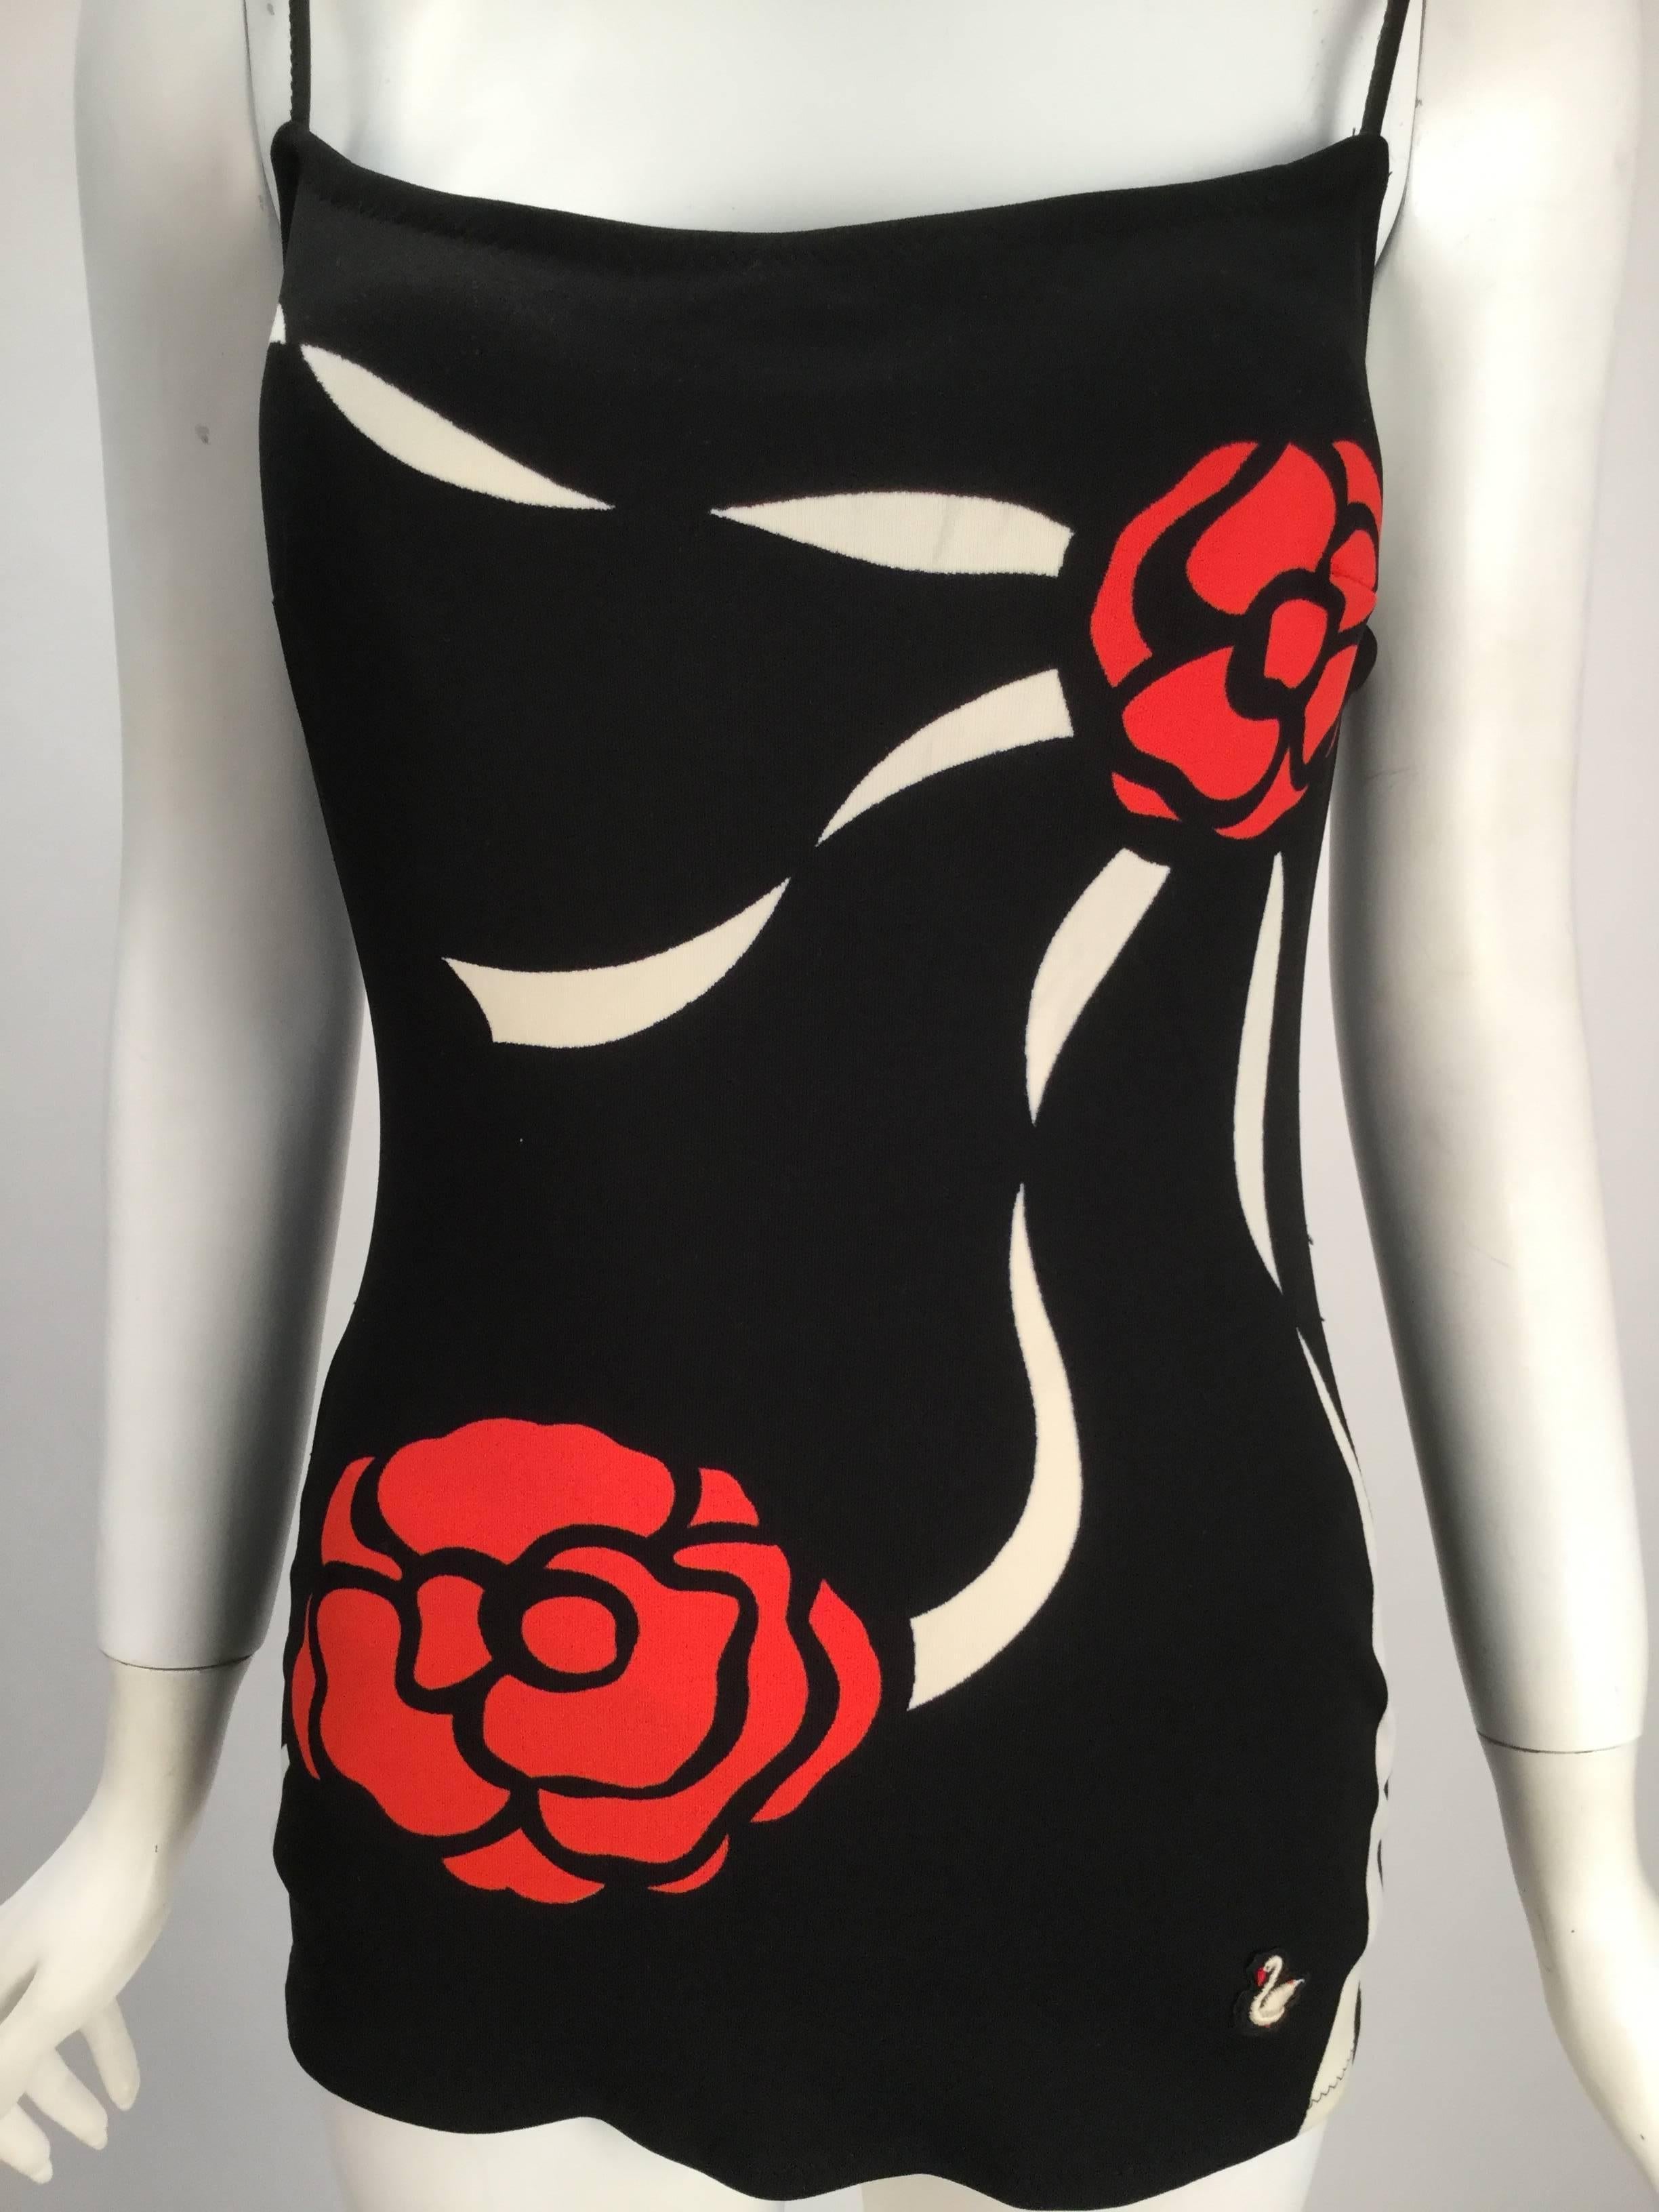 1960s Herma Black bathing suit with two roses connected by white lines on the front. Back is solid black. Low back, thin straps. Swim suit is made from 100% Helanca (nylon).  Fantastic!

Modern size 2

*All garments and accessories have been